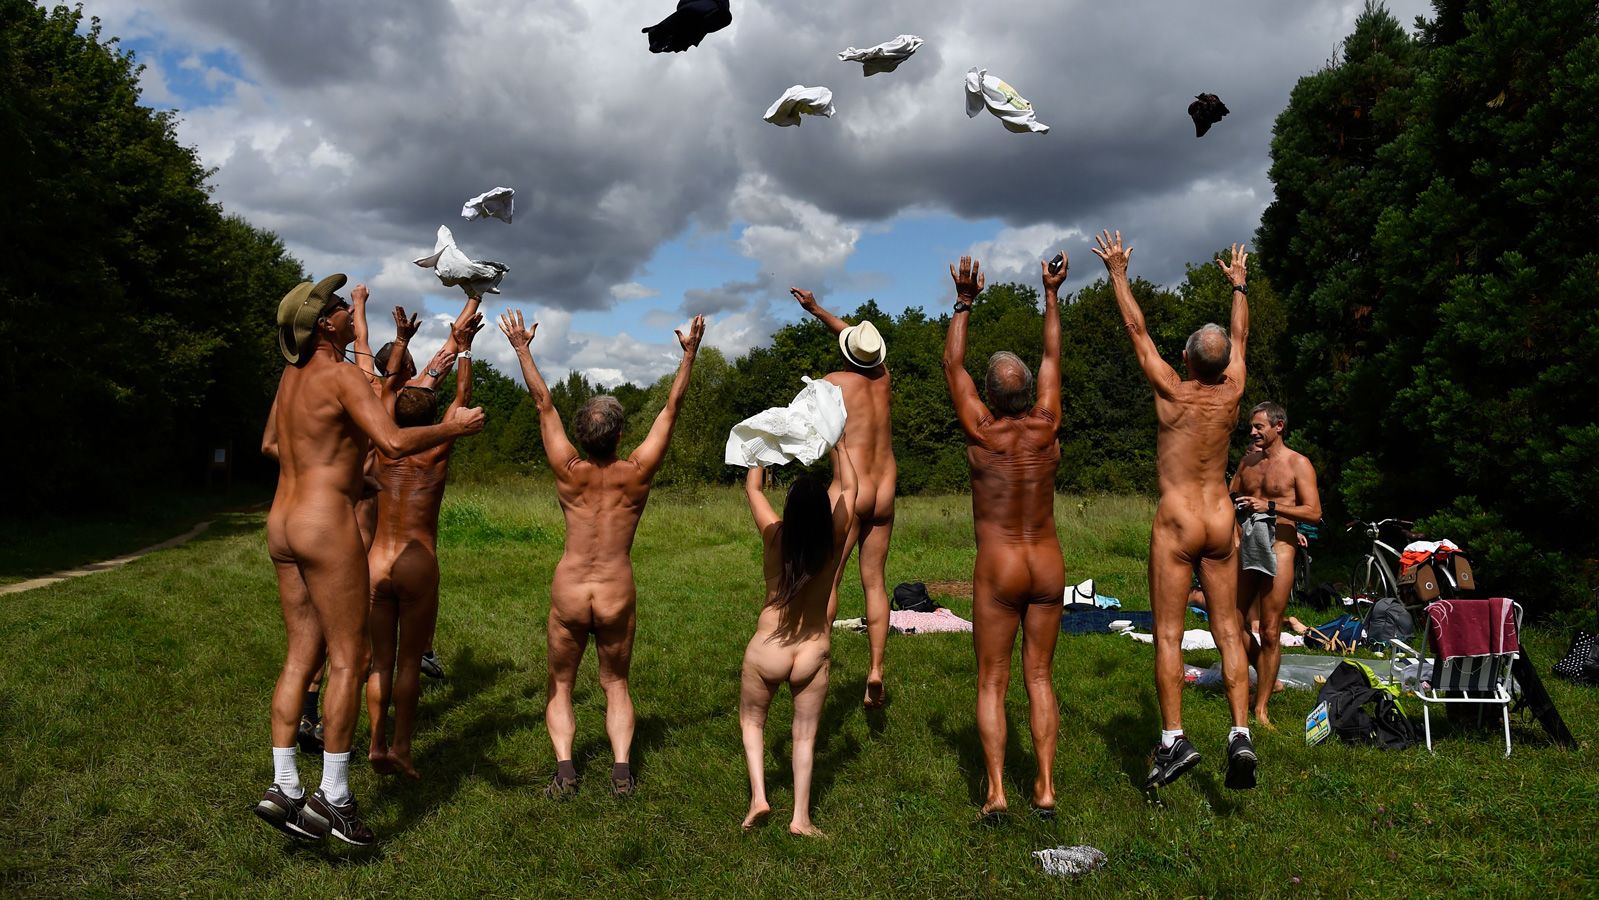 Naked people throw their clothes up in the air at a newly opened space for naturists at the Bois de Vincennes park in Paris on August 31, 2017. The space will be open daily until October 15th. / AFP PHOTO / Bertrand GUAY (Photo credit should read BERTRAND GUAY/AFP/Getty Images)